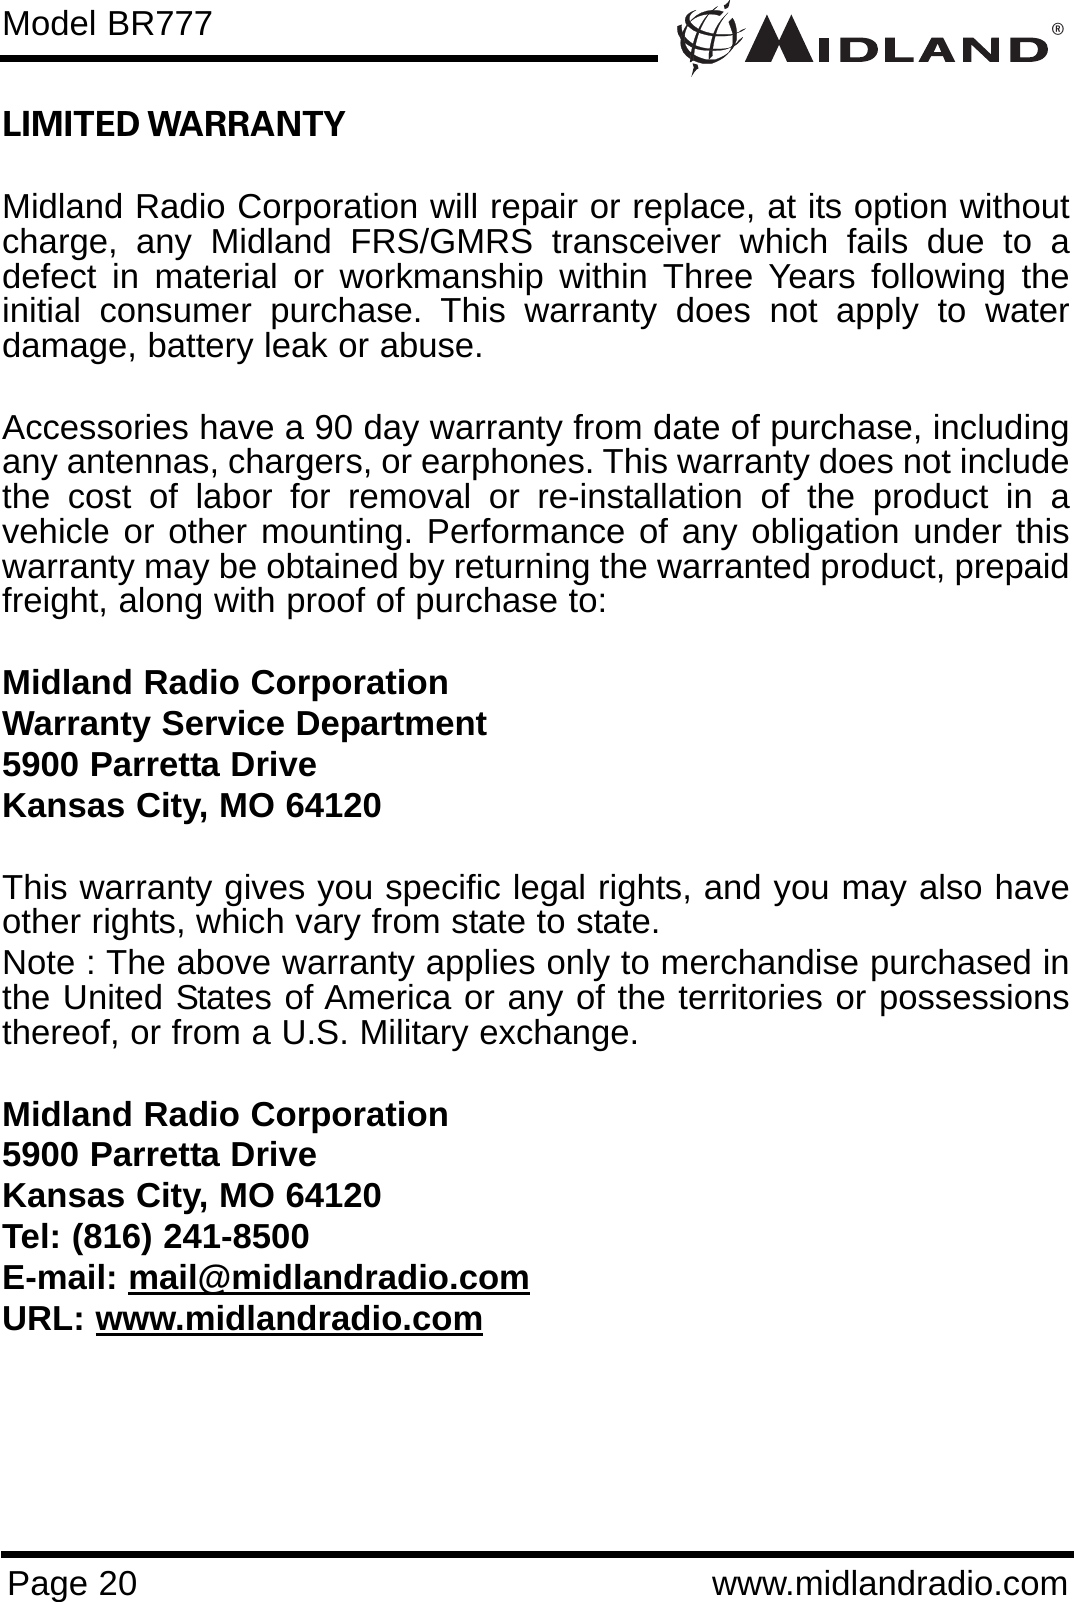 ®Page 20 www.midlandradio.comLIMITED WARRANTY Midland Radio Corporation will repair or replace, at its option withoutcharge, any Midland FRS/GMRS transceiver which fails due to adefect in material or workmanship within Three Years following theinitial consumer purchase. This warranty does not apply to waterdamage, battery leak or abuse.Accessories have a 90 day warranty from date of purchase, includingany antennas, chargers, or earphones. This warranty does not includethe cost of labor for removal or re-installation of the product in avehicle or other mounting. Performance of any obligation under thiswarranty may be obtained by returning the warranted product, prepaidfreight, along with proof of purchase to:Midland Radio CorporationWarranty Service Department5900 Parretta DriveKansas City, MO 64120This warranty gives you specific legal rights, and you may also haveother rights, which vary from state to state.Note : The above warranty applies only to merchandise purchased inthe United States of America or any of the territories or possessionsthereof, or from a U.S. Military exchange.Midland Radio Corporation5900 Parretta DriveKansas City, MO 64120Tel: (816) 241-8500E-mail: mail@midlandradio.comURL: www.midlandradio.comModel BR777